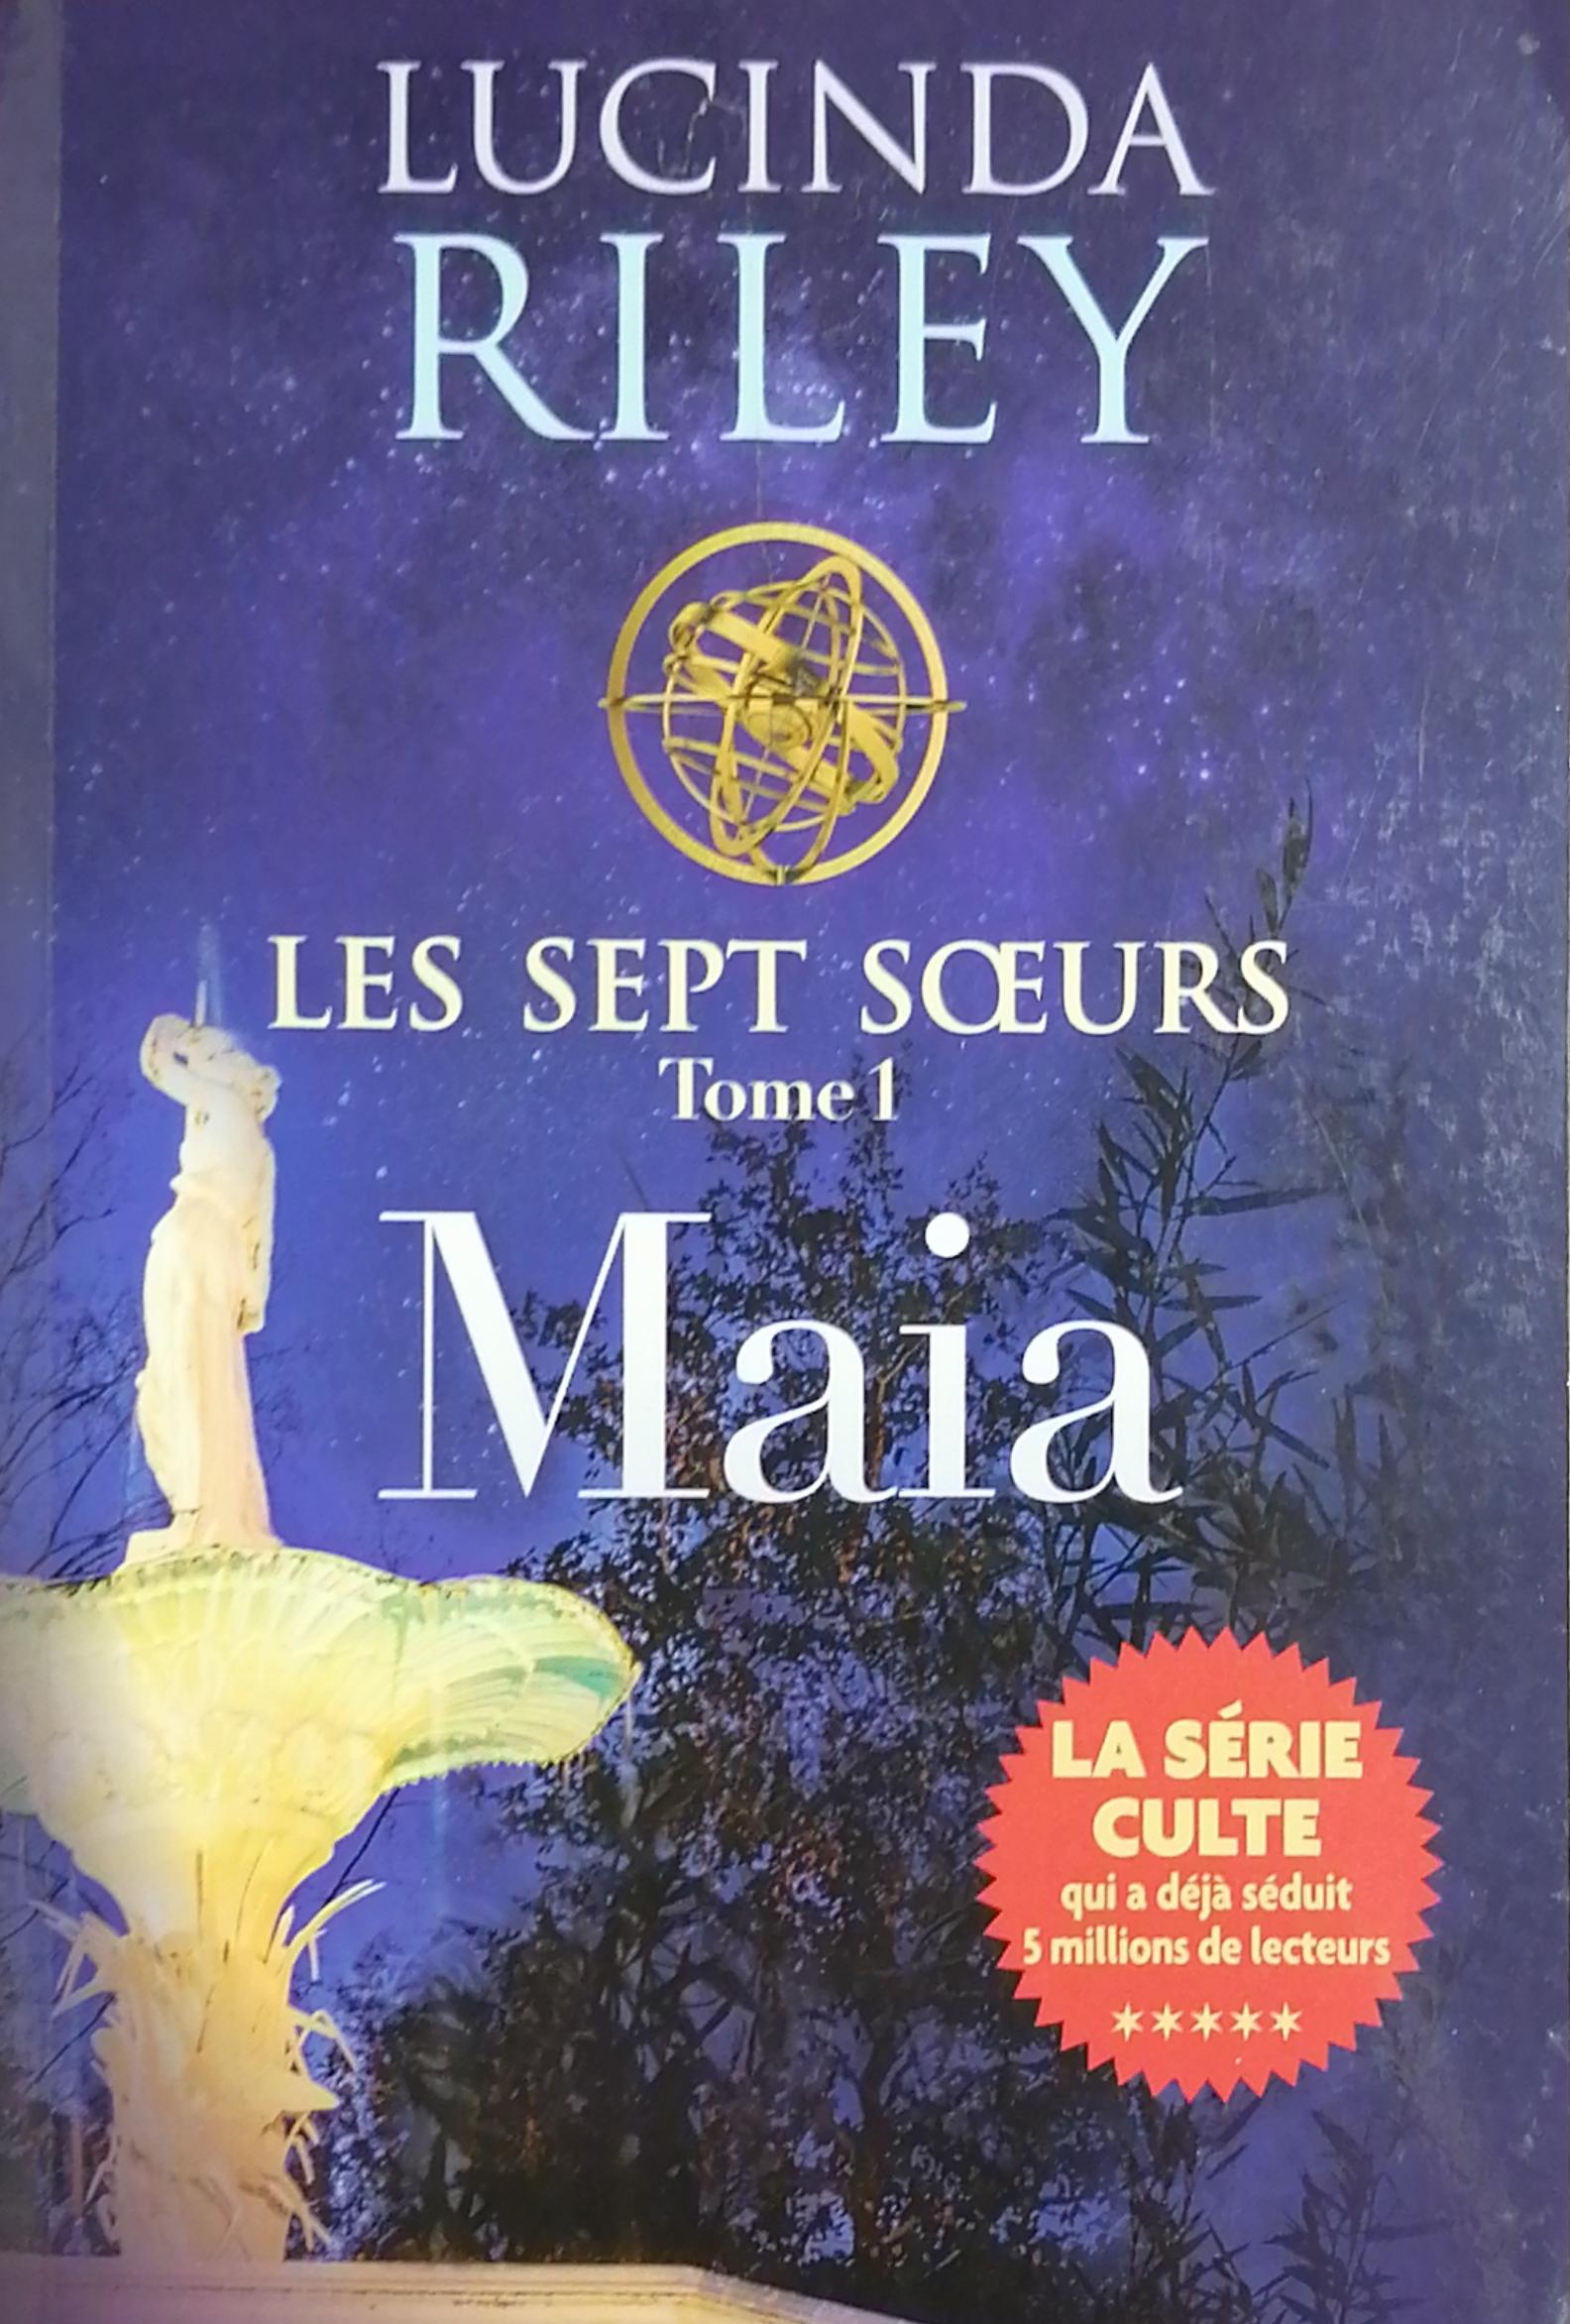 LES SEPT SOEURS TOME 1 MAIA by Lucinda Riley (FRENCH TRANSLATION